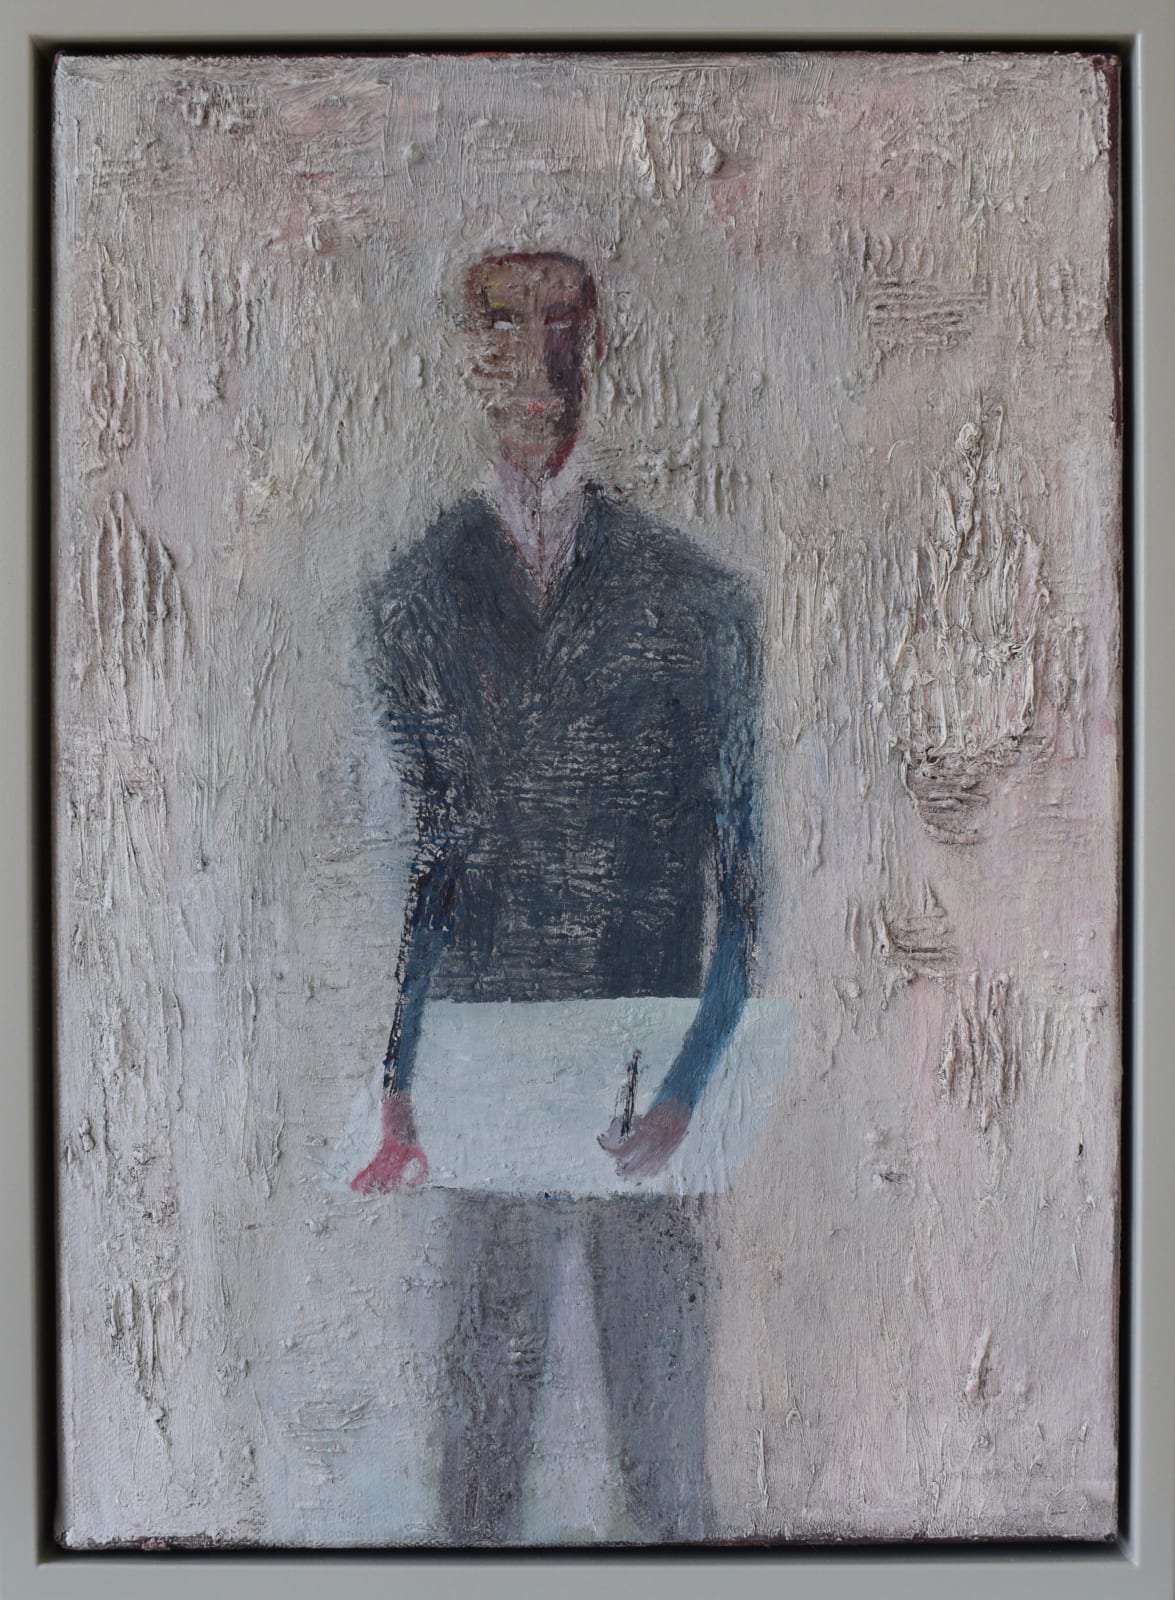 Michael Rees, Man in the Mirror, 2019